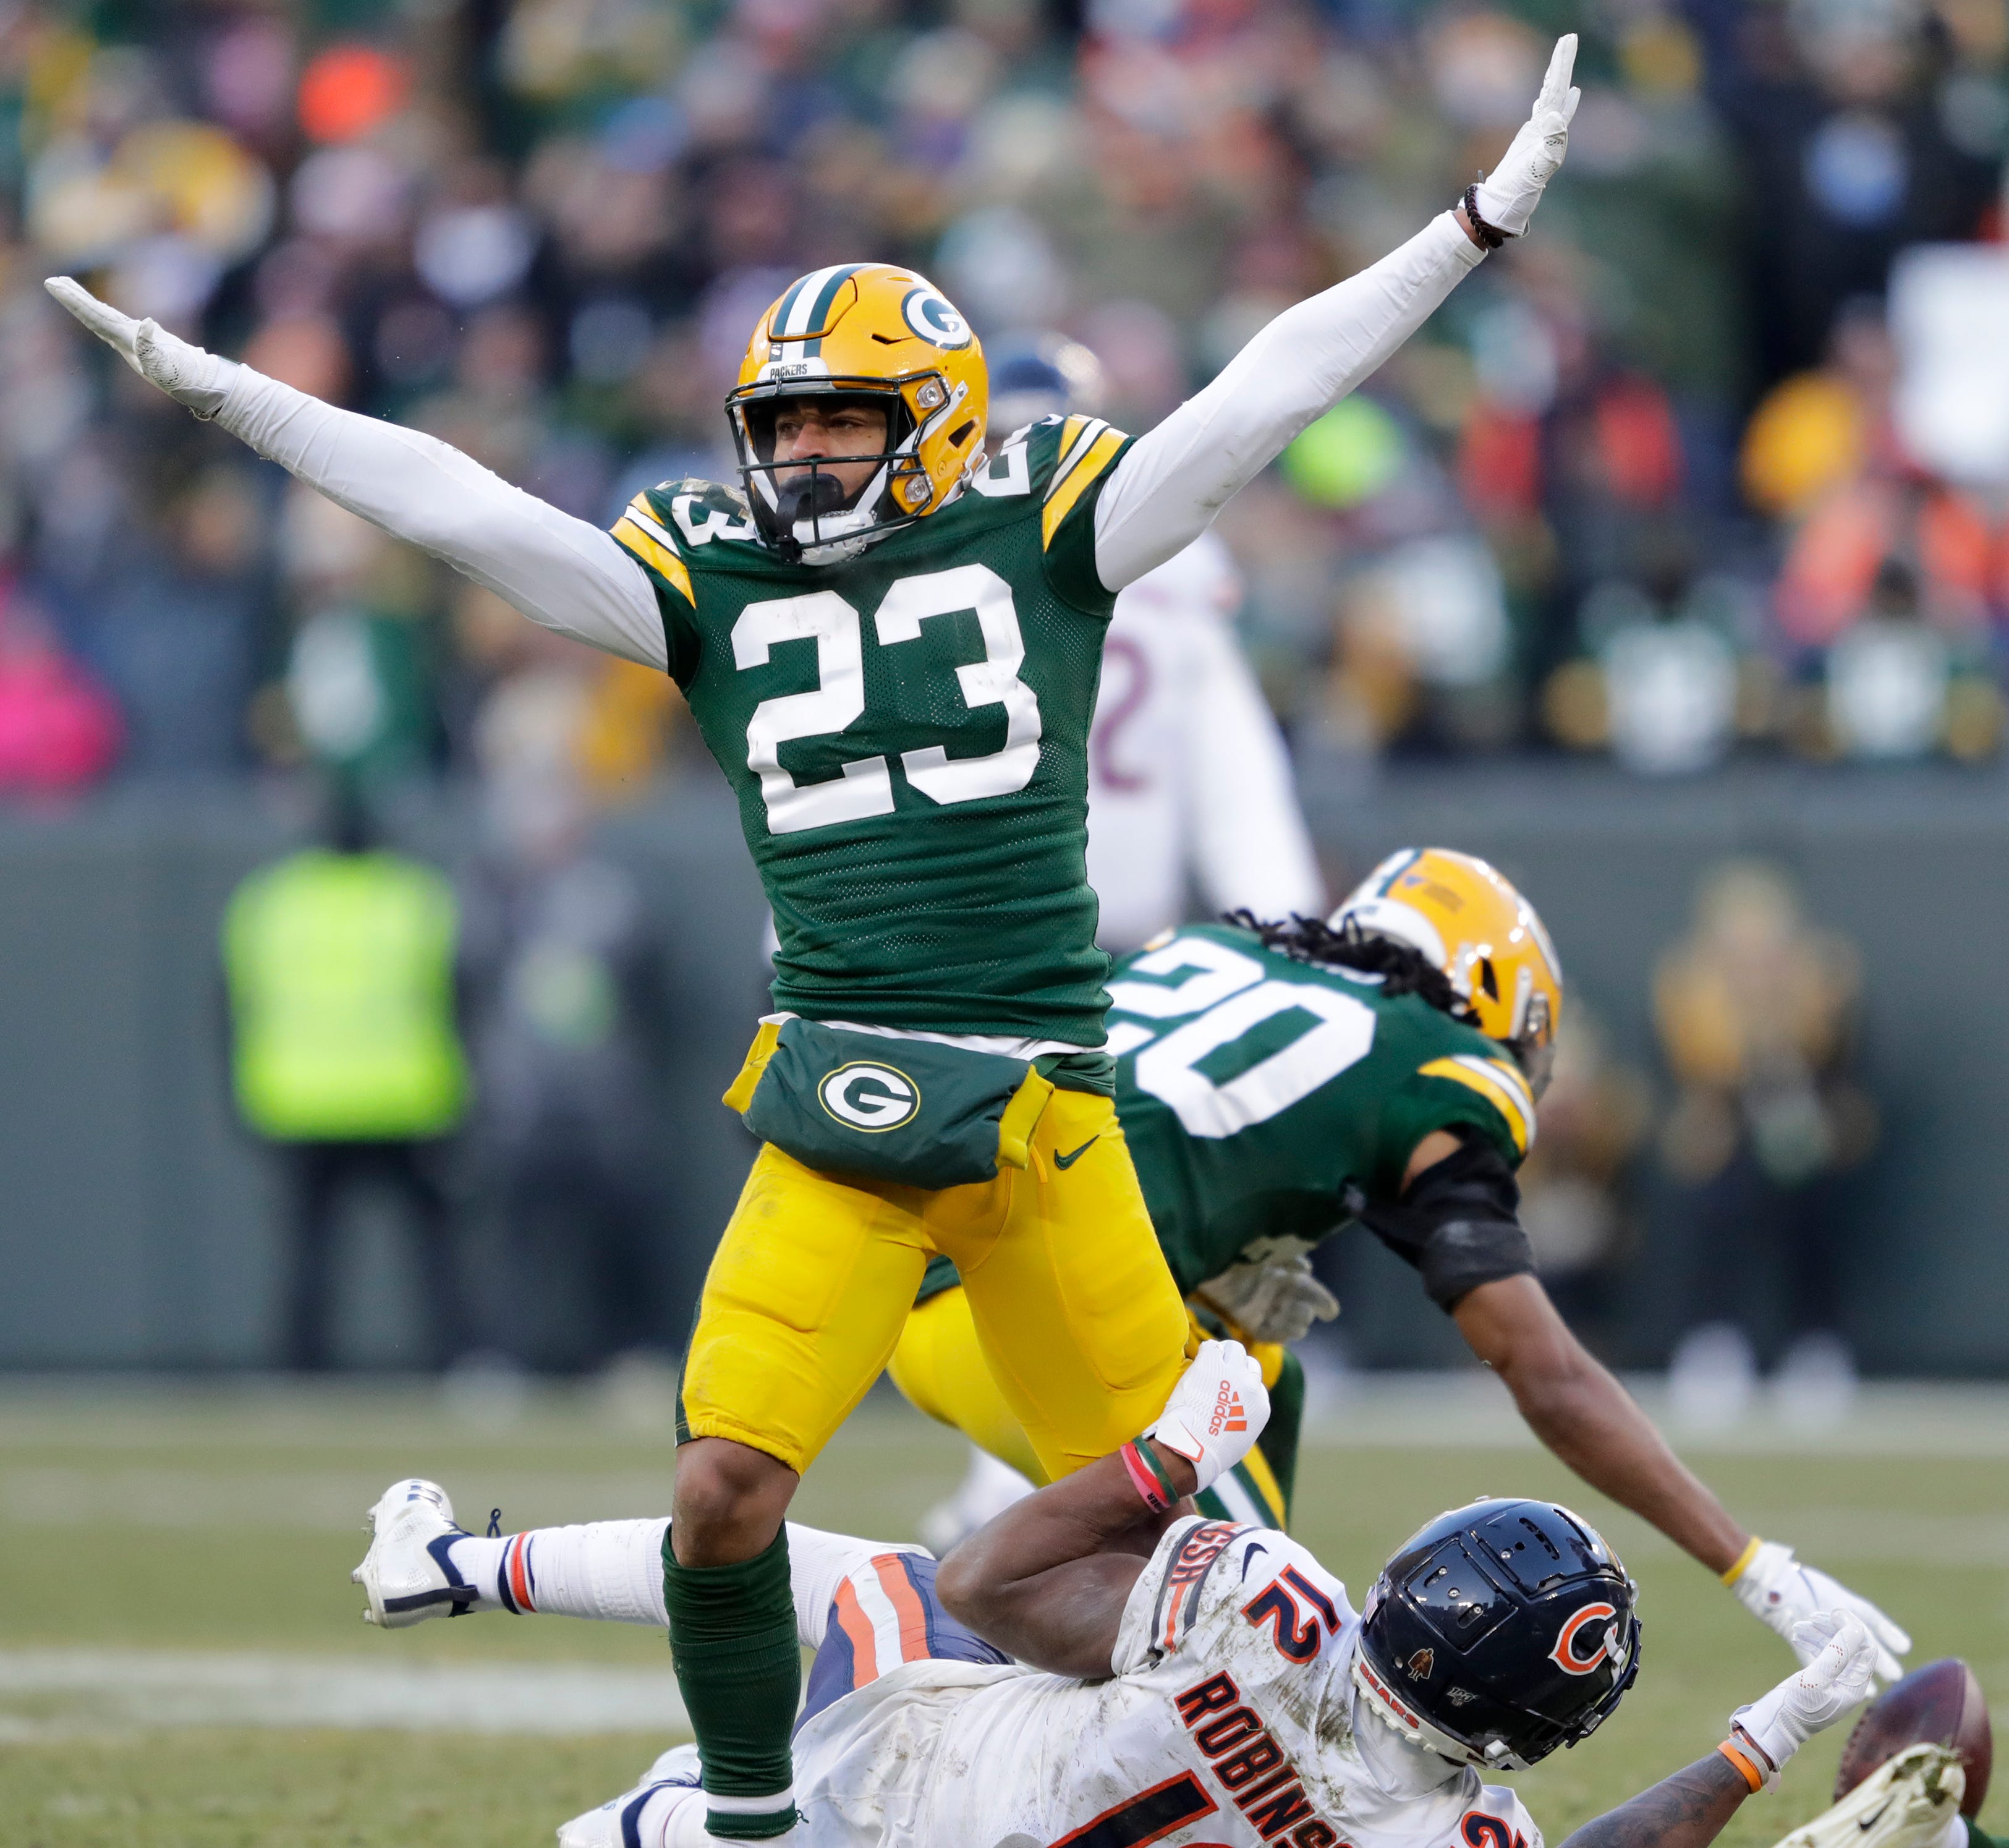 Green Bay Packers cornerback Jaire Alexander (23) celebrates breaking up a pass intended for Chicago Bears wide receiver Allen Robinson (12) with less than two minutes left in the game Sunday, December 15, 2019, at Lambeau Field in Green Bay, Wis.